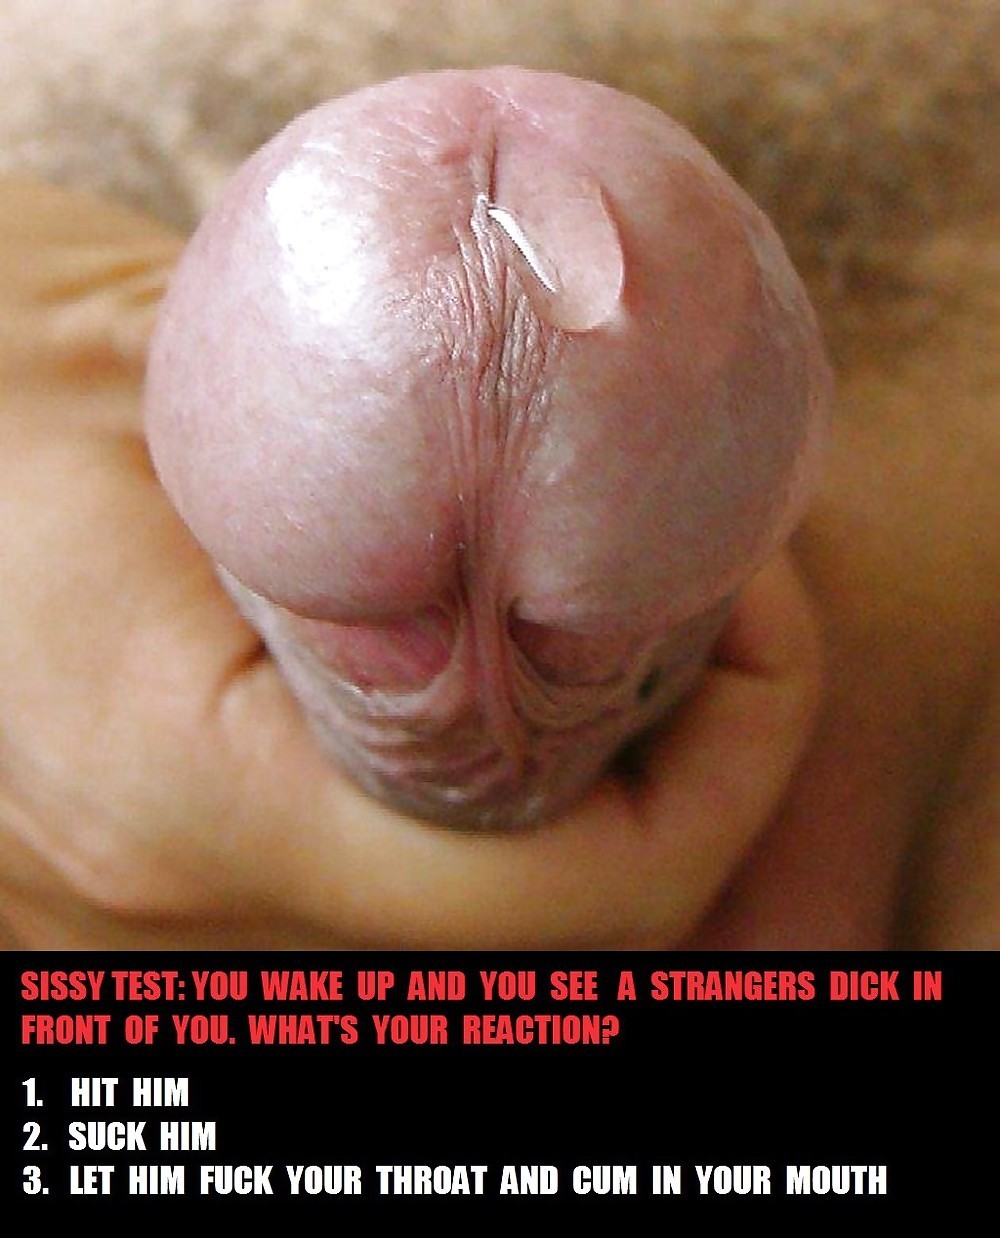 Pissing hard foreskin have fun and jizz 4 on rus.sexviptube.com